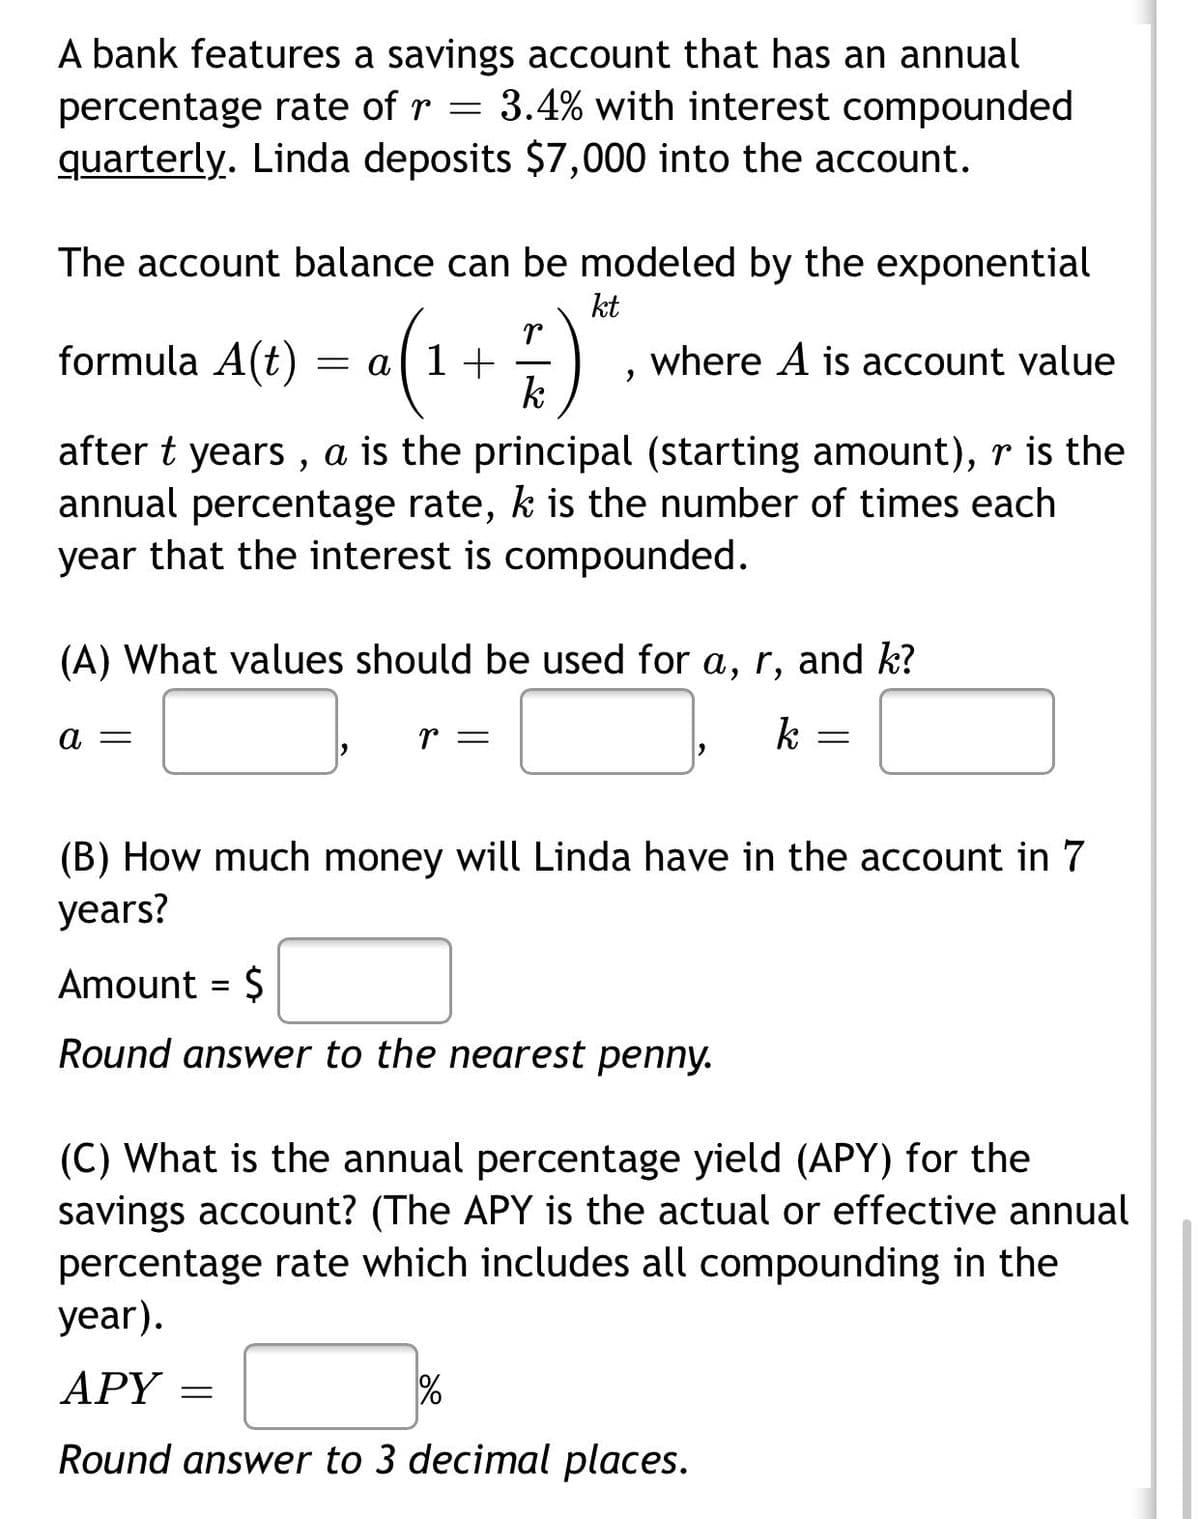 A bank features a savings account that has an annual
percentage rate of r = 3.4% with interest compounded
quarterly. Linda deposits $7,000 into the account.
The account balance can be modeled by the exponential
kt
formula A(t) = a(1+)"
where A is account value
k
after t years , a is the principal (starting amount), r is the
annual percentage rate, k is the number of times each
year that the interest is compounded.
(A) What values should be used for a, r, and k?
а —
r =
k
(B) How much money will Linda have in the account in 7
years?
Amount = $
Round answer to the nearest penny.
(C) What is the annual percentage yield (APY) for the
savings account? (The APY is the actual or effective annual
percentage rate which includes all compounding in the
year).
APY
Round answer to 3 decimal places.
